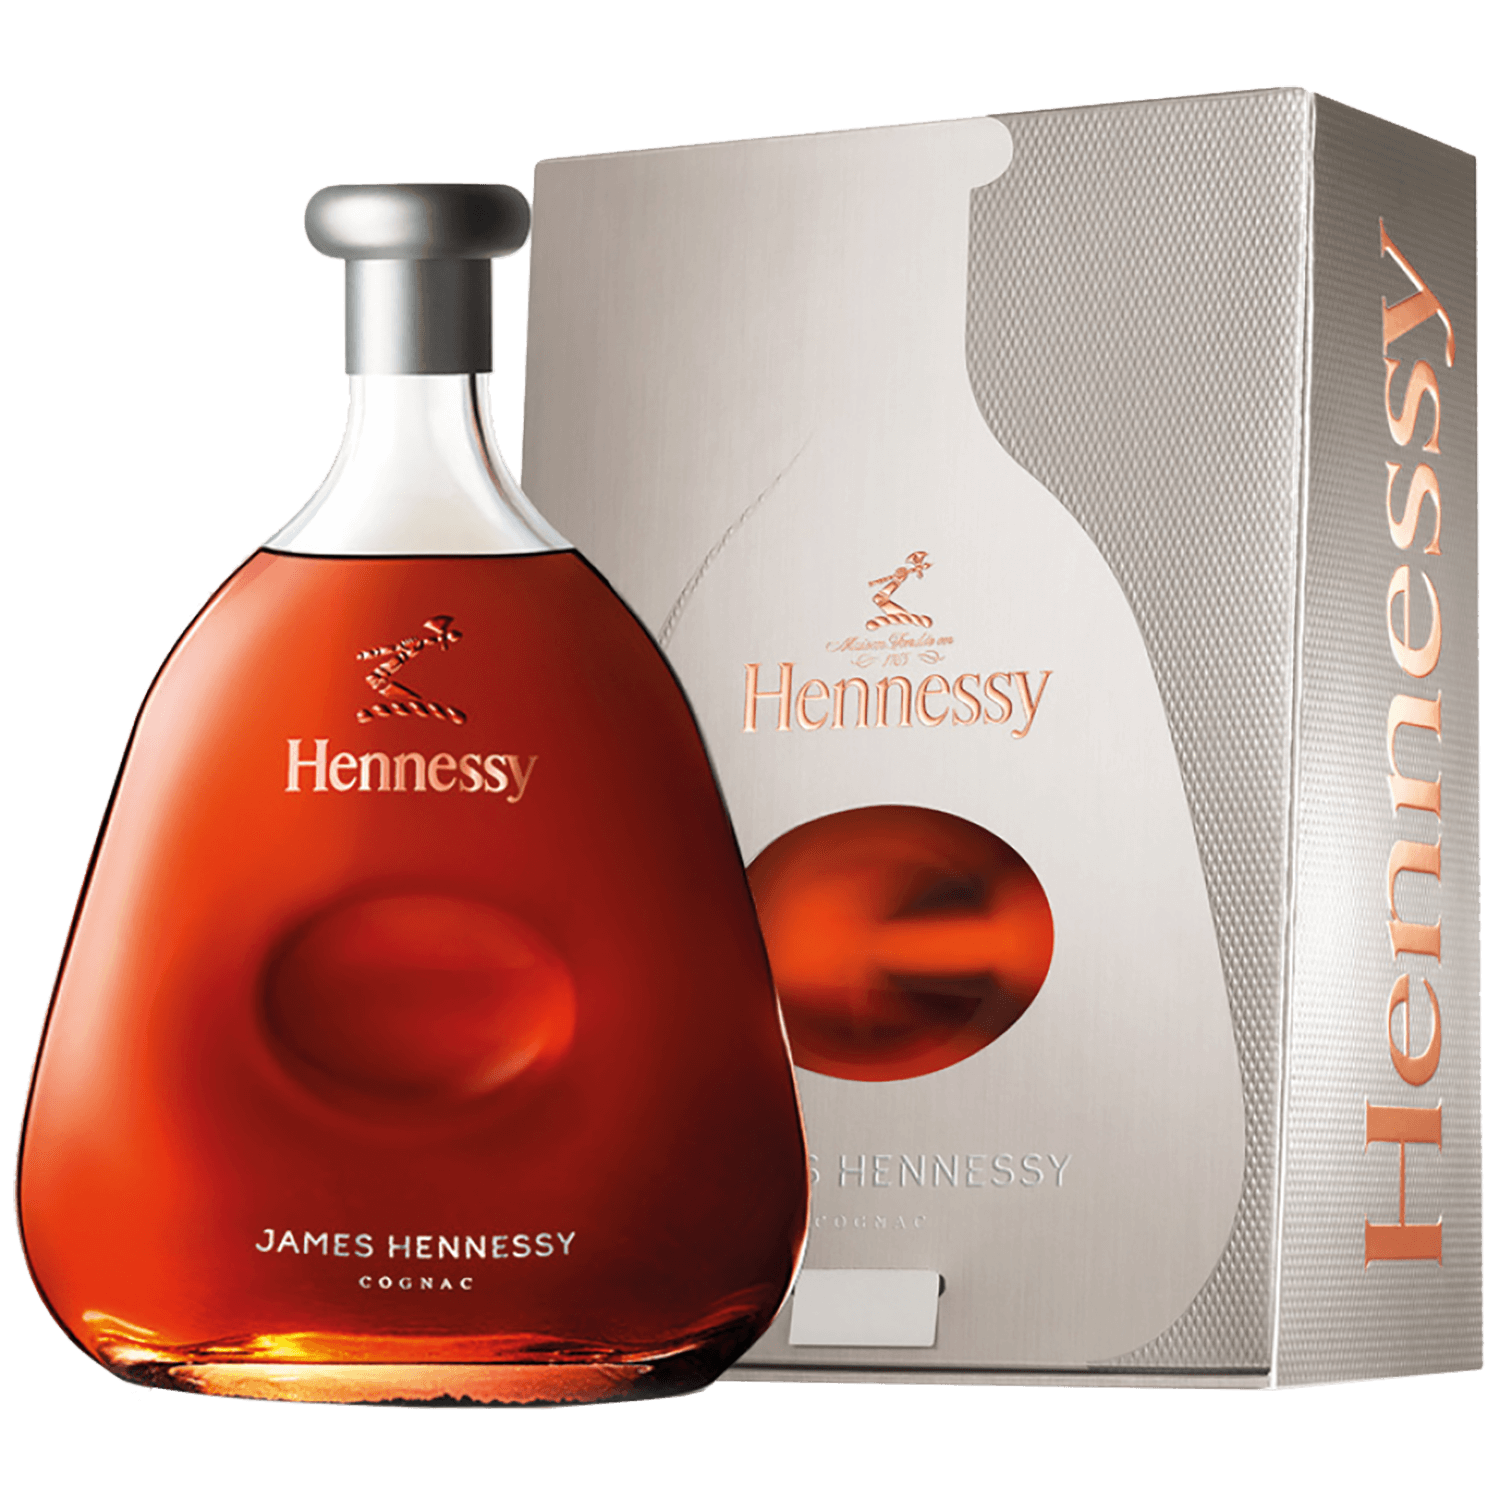 Hennessy James Hennessy Cognac (gift box)